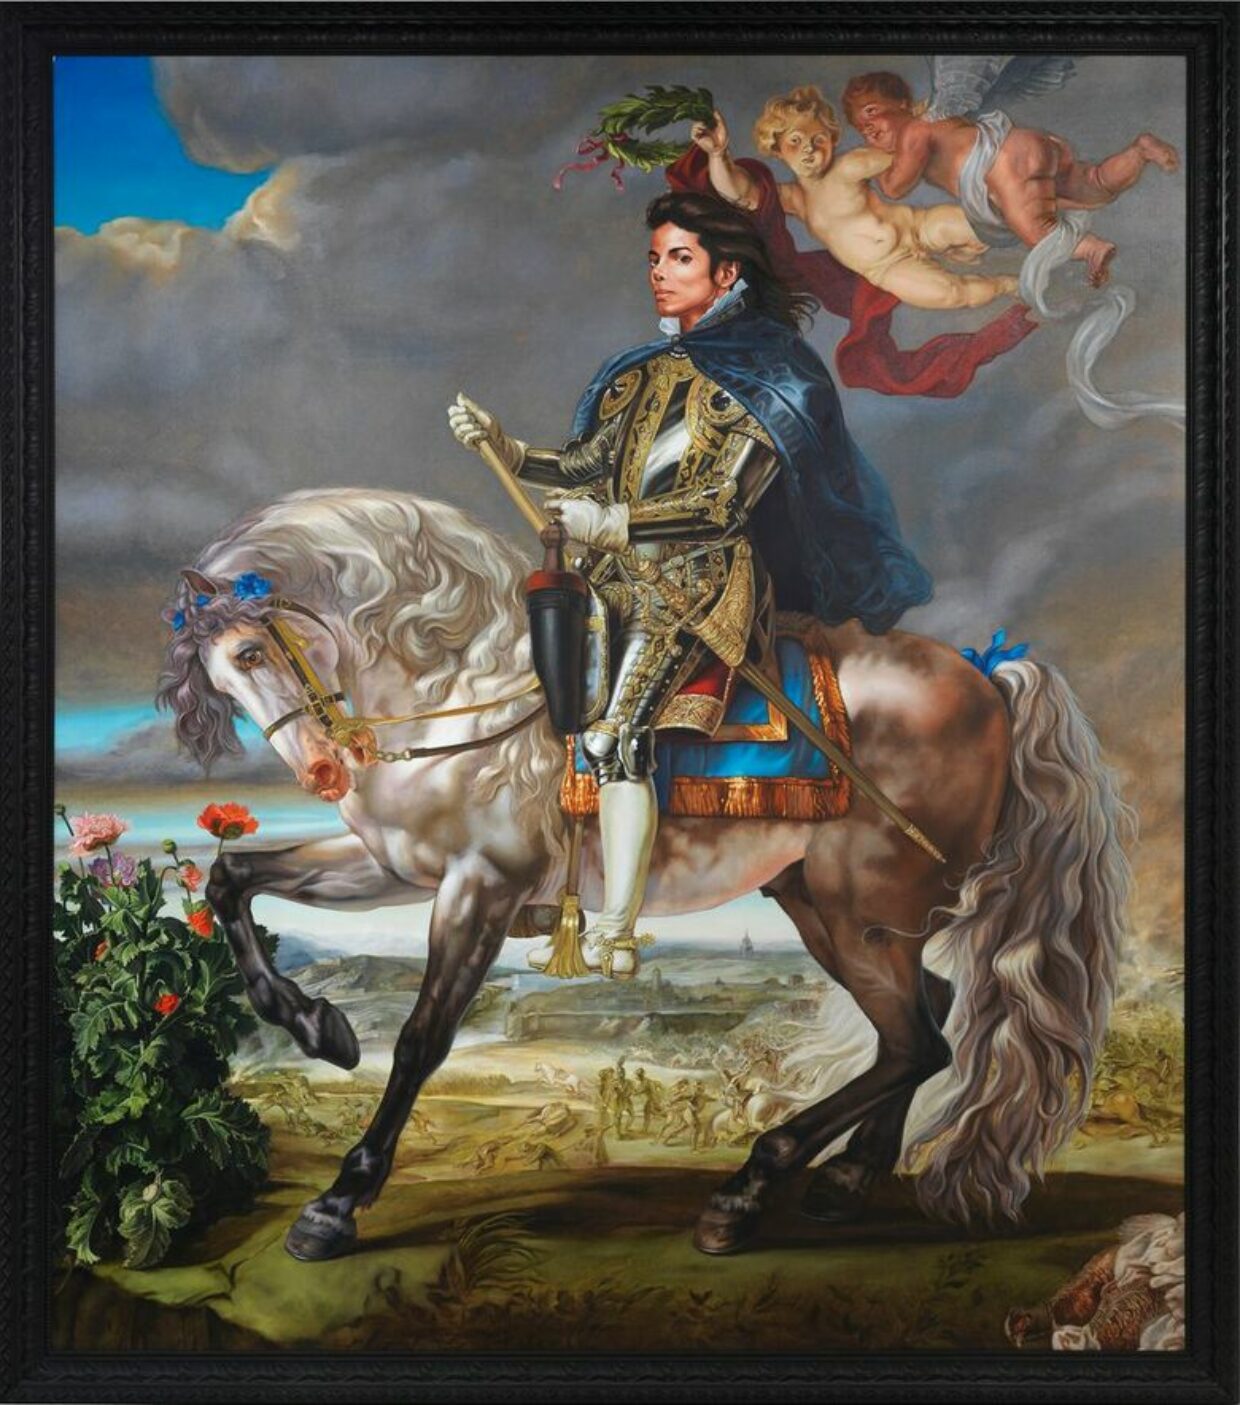 A New Republic: Kehinde Wiley’s Work at Seattle Art Museum | 2